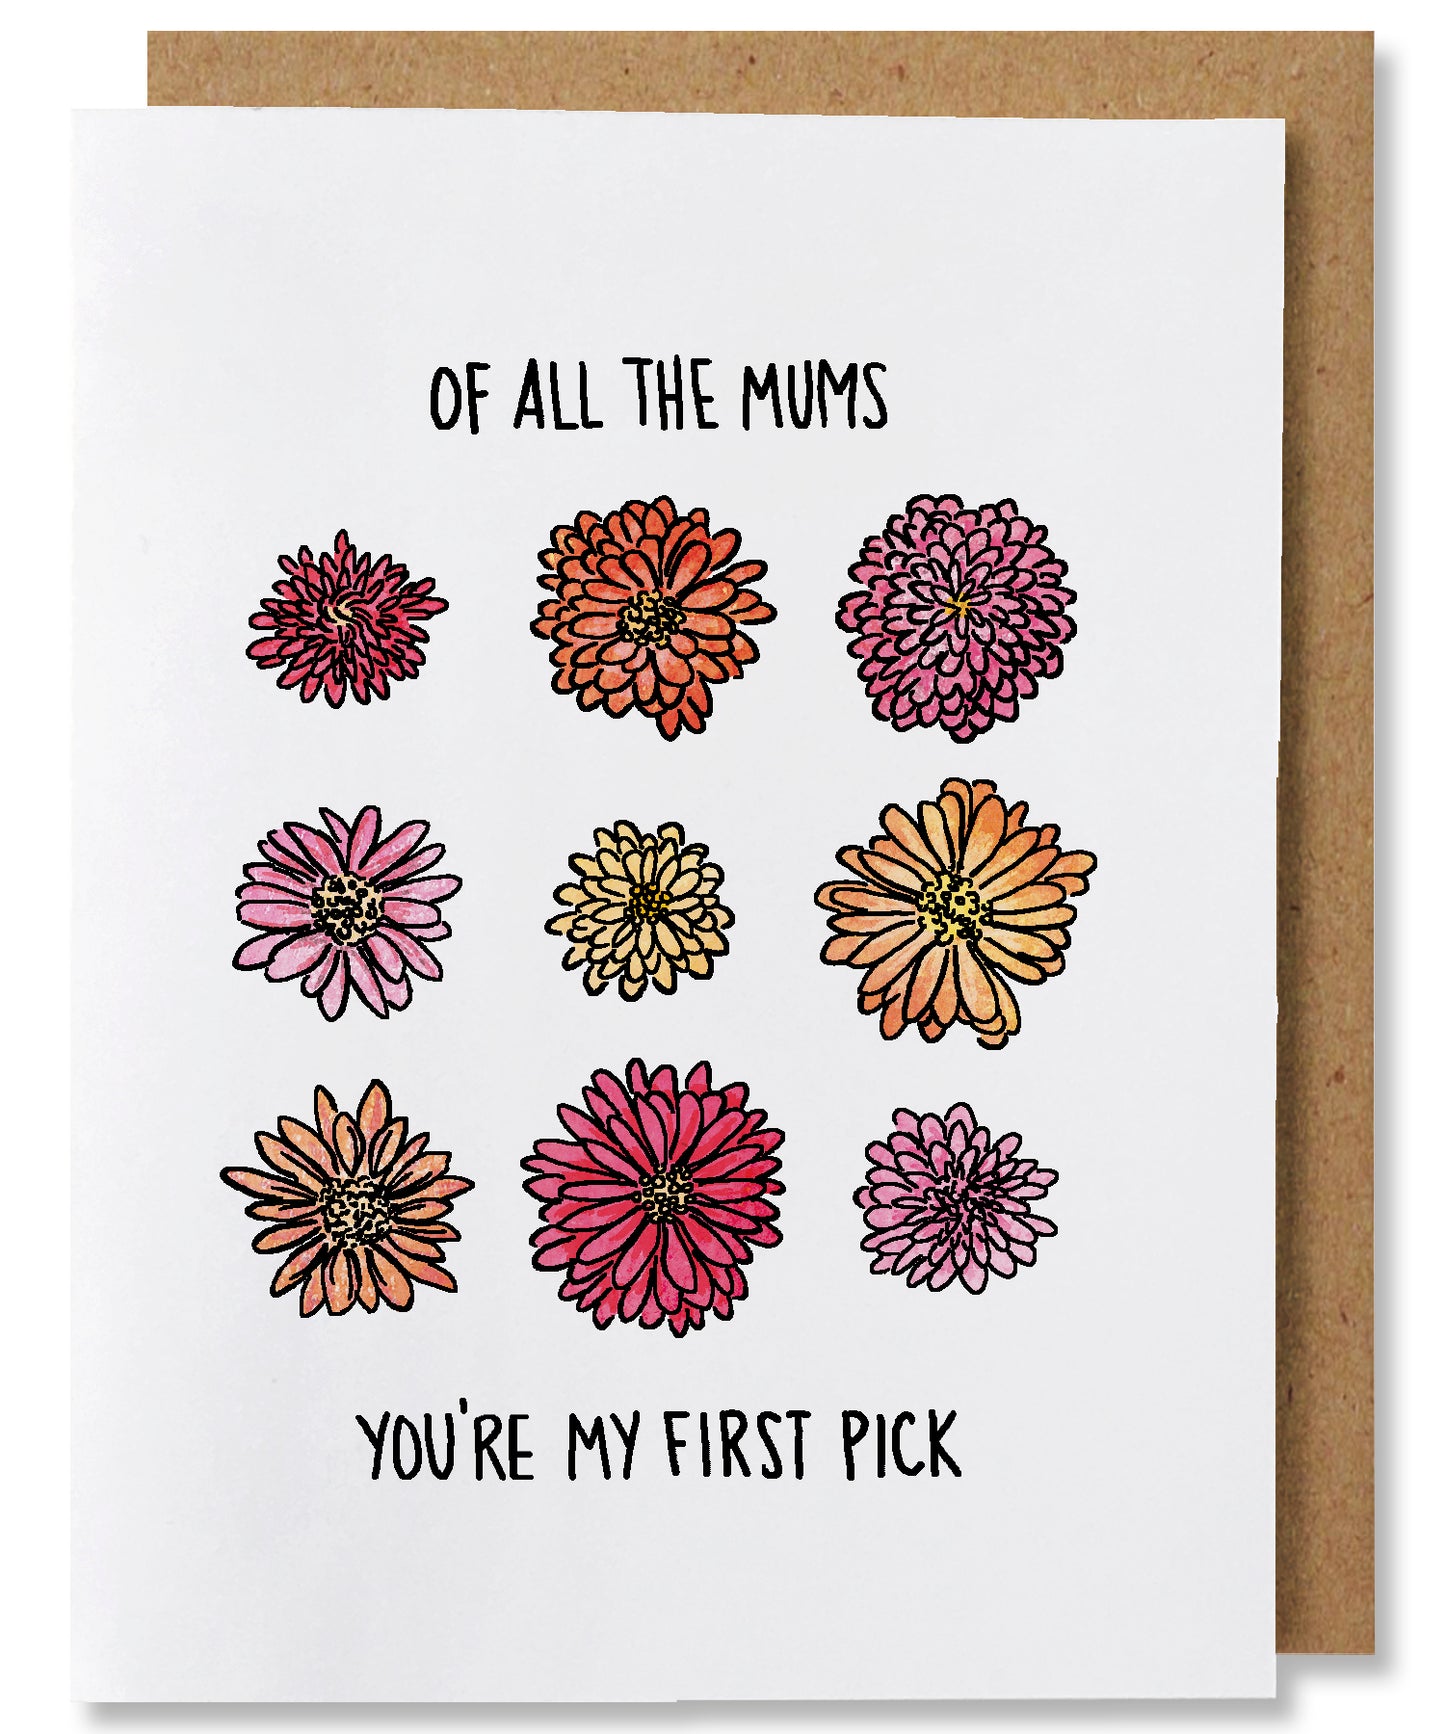 Mums - Illustrated Funny Flower Pun Mother's Day Card